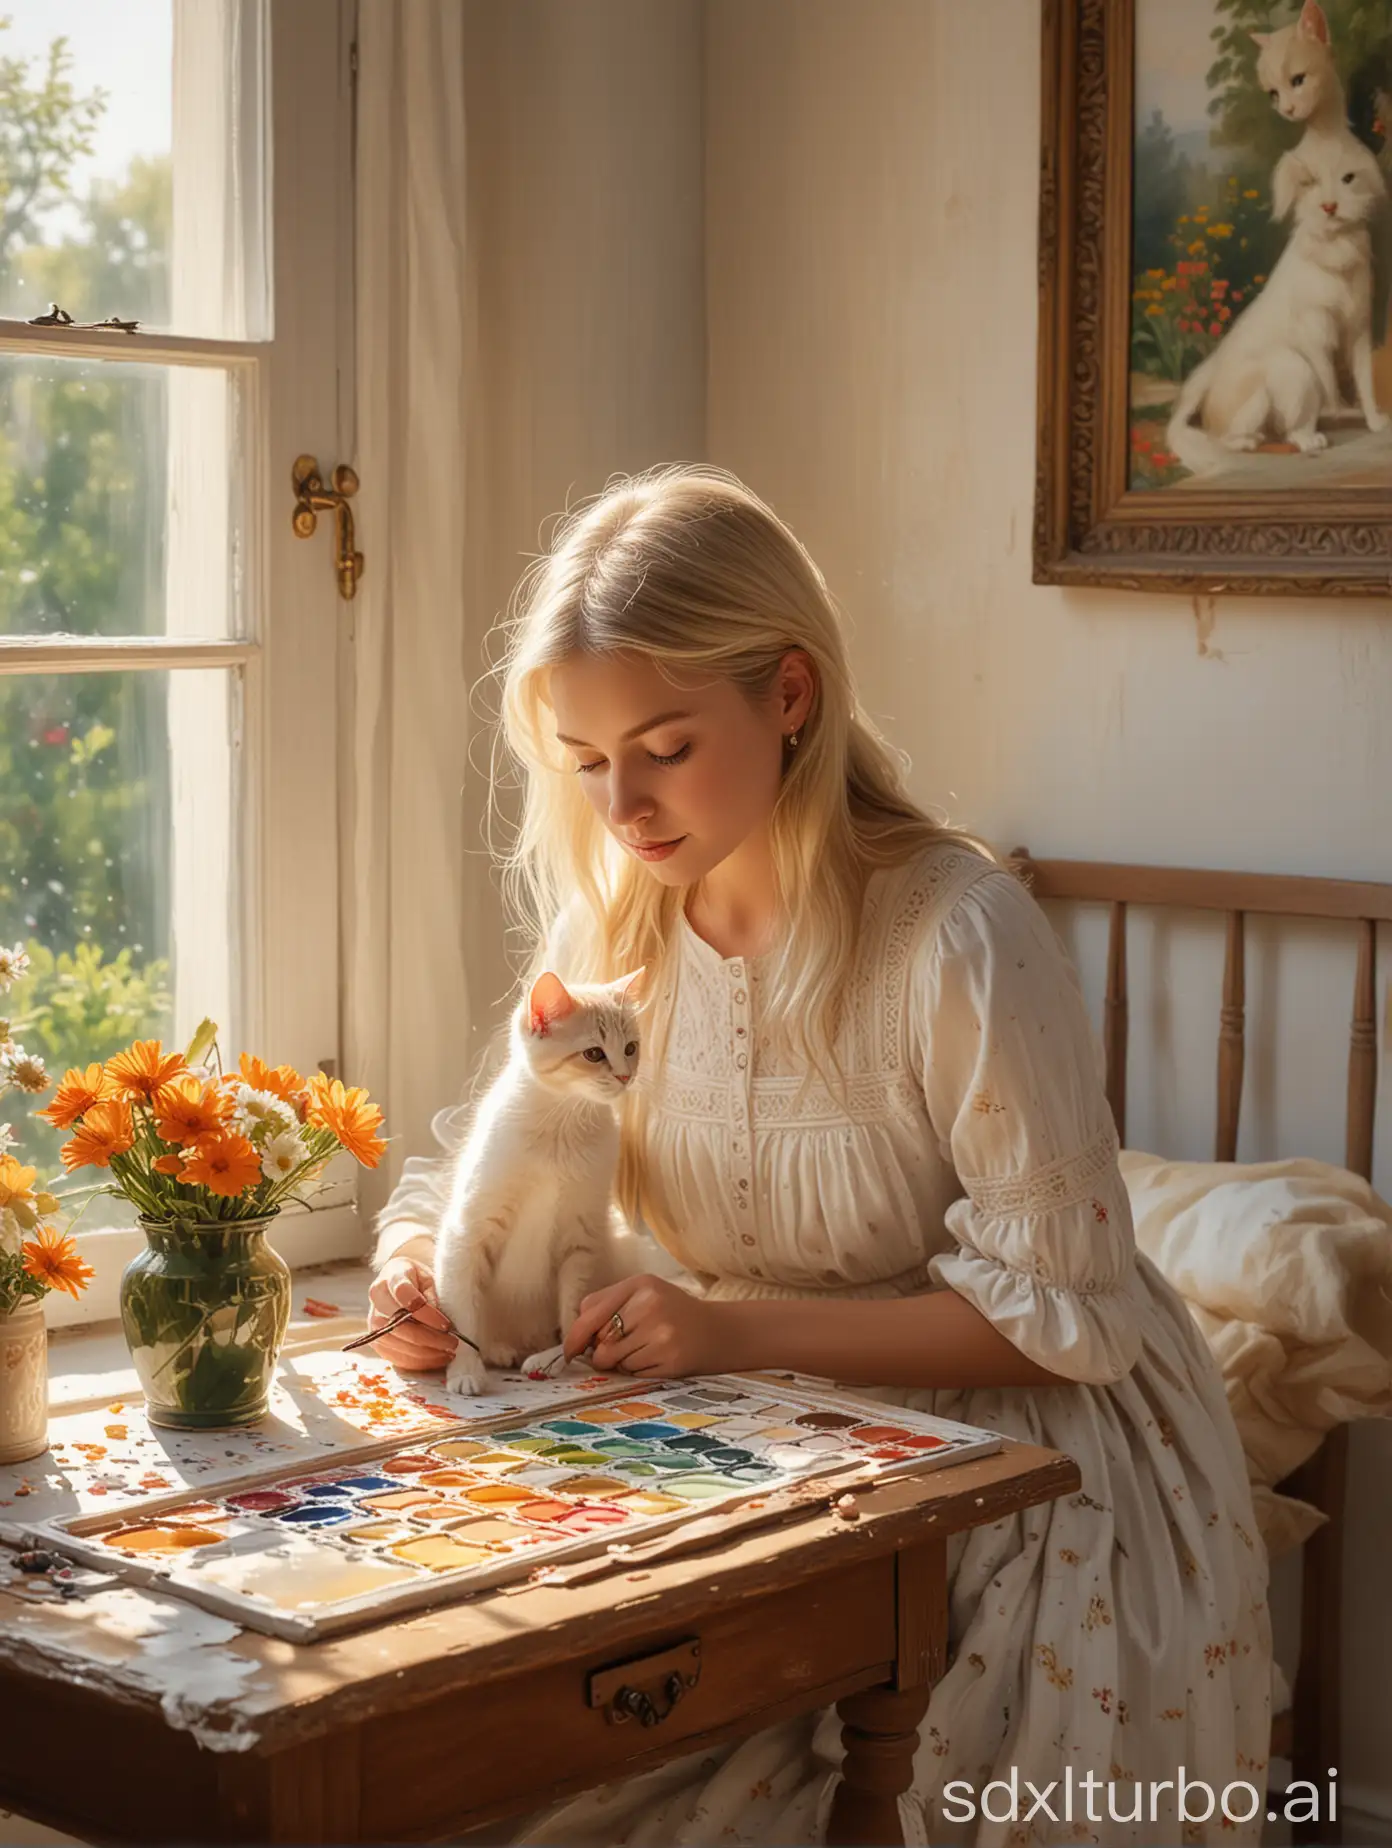 A thin blonde girl with intricate details and soft lines, lost in the art of painting a portrait, joined by a curious kitten that sniffs at the palette and brushes, both enjoying a tranquil atmosphere in a cozy bedroom, framed by a sunny window that illuminates a softly glowing outdoor garden in the background